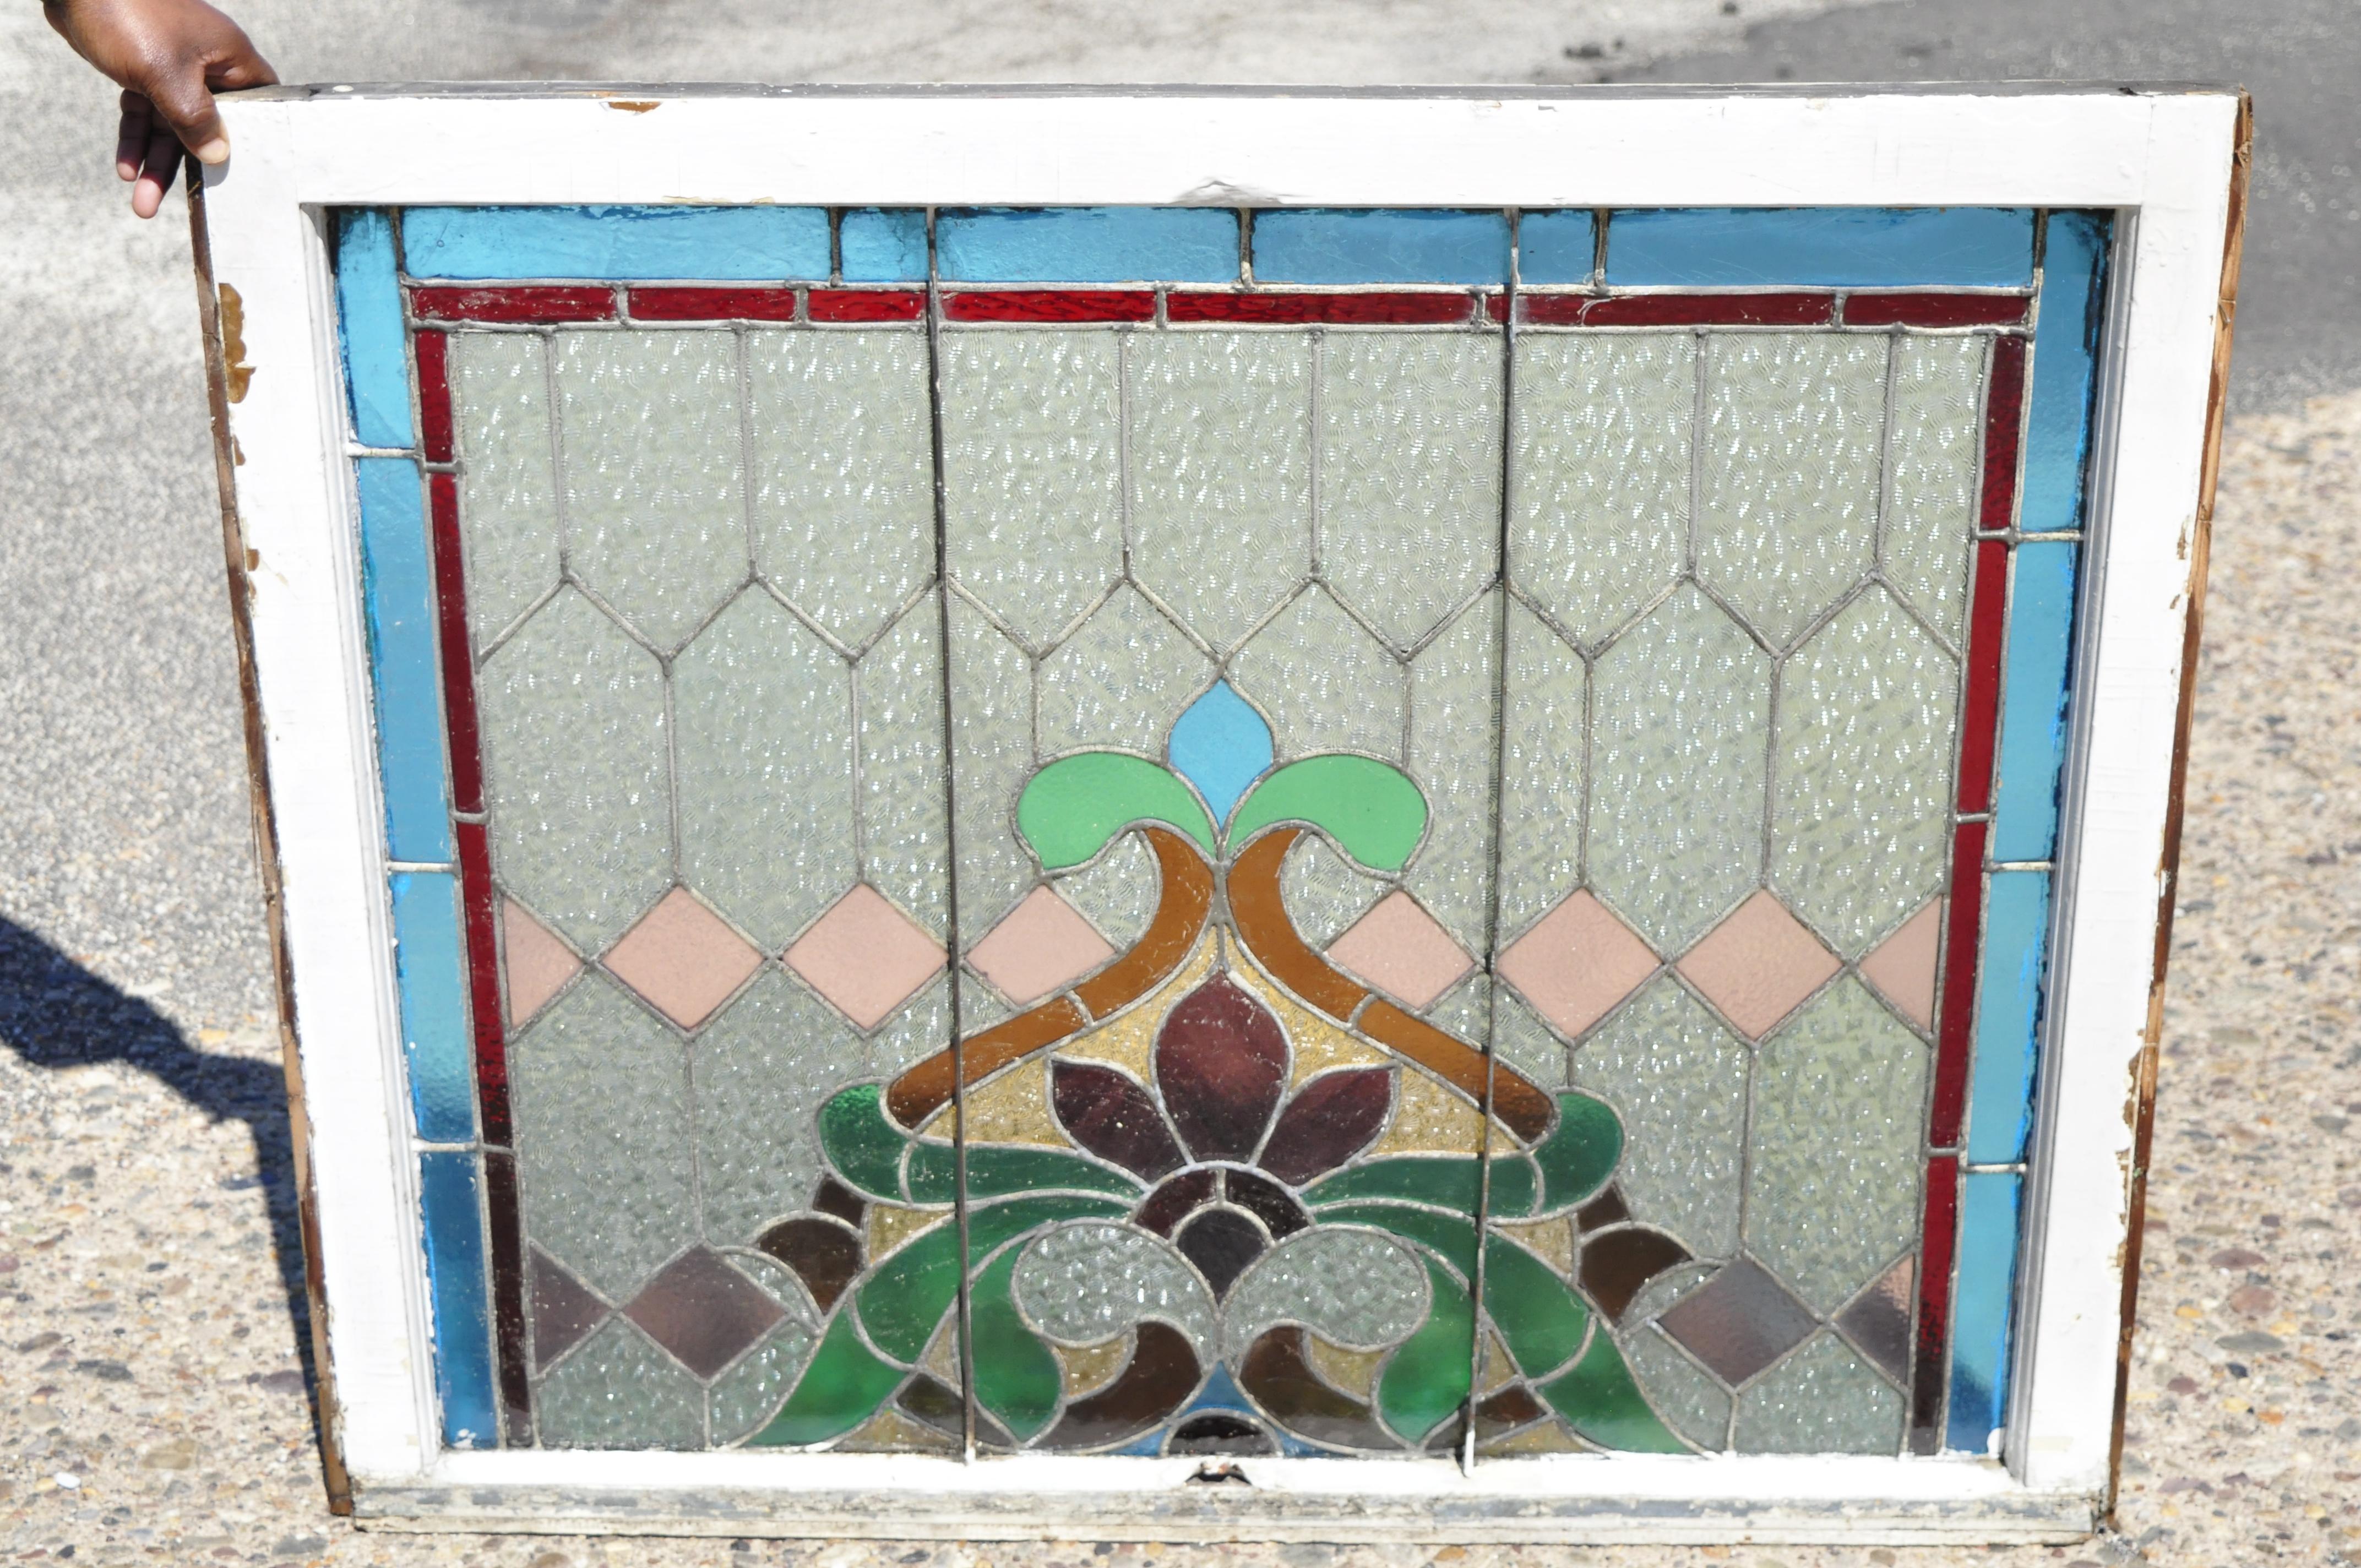 North American Victorian Leaded Stained Glass Blue Green Pink Orange Fleur de Lis Window For Sale